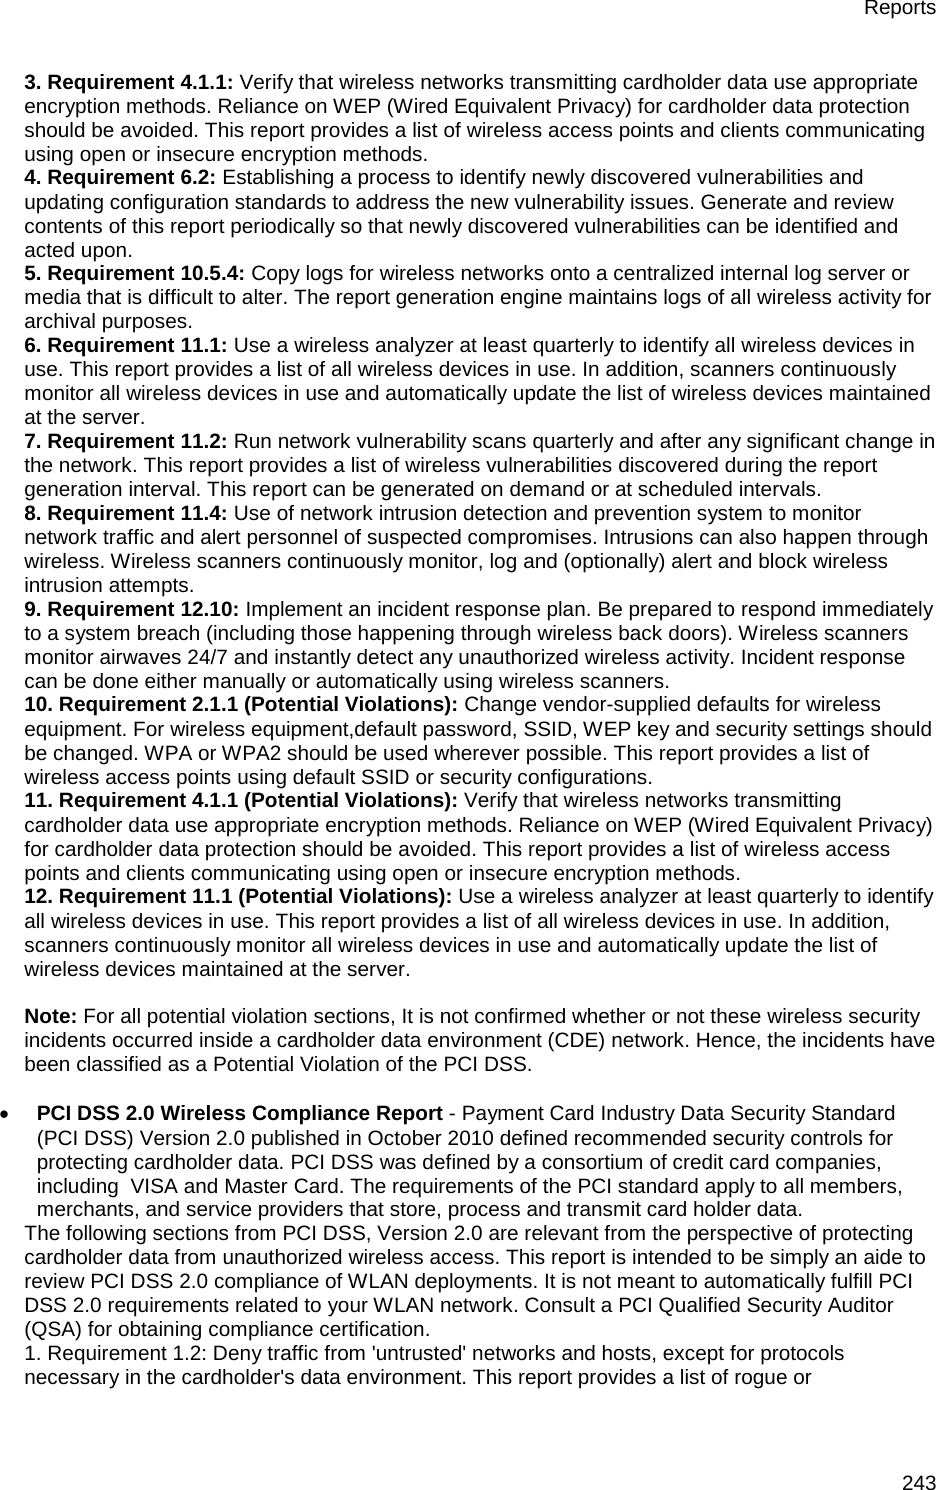 Reports 243 3. Requirement 4.1.1: Verify that wireless networks transmitting cardholder data use appropriate encryption methods. Reliance on WEP (Wired Equivalent Privacy) for cardholder data protection should be avoided. This report provides a list of wireless access points and clients communicating using open or insecure encryption methods. 4. Requirement 6.2: Establishing a process to identify newly discovered vulnerabilities and updating configuration standards to address the new vulnerability issues. Generate and review contents of this report periodically so that newly discovered vulnerabilities can be identified and acted upon. 5. Requirement 10.5.4: Copy logs for wireless networks onto a centralized internal log server or media that is difficult to alter. The report generation engine maintains logs of all wireless activity for archival purposes. 6. Requirement 11.1: Use a wireless analyzer at least quarterly to identify all wireless devices in use. This report provides a list of all wireless devices in use. In addition, scanners continuously monitor all wireless devices in use and automatically update the list of wireless devices maintained at the server. 7. Requirement 11.2: Run network vulnerability scans quarterly and after any significant change in the network. This report provides a list of wireless vulnerabilities discovered during the report generation interval. This report can be generated on demand or at scheduled intervals. 8. Requirement 11.4: Use of network intrusion detection and prevention system to monitor network traffic and alert personnel of suspected compromises. Intrusions can also happen through wireless. Wireless scanners continuously monitor, log and (optionally) alert and block wireless intrusion attempts. 9. Requirement 12.10: Implement an incident response plan. Be prepared to respond immediately to a system breach (including those happening through wireless back doors). Wireless scanners monitor airwaves 24/7 and instantly detect any unauthorized wireless activity. Incident response can be done either manually or automatically using wireless scanners. 10. Requirement 2.1.1 (Potential Violations): Change vendor-supplied defaults for wireless equipment. For wireless equipment,default password, SSID, WEP key and security settings should be changed. WPA or WPA2 should be used wherever possible. This report provides a list of wireless access points using default SSID or security configurations. 11. Requirement 4.1.1 (Potential Violations): Verify that wireless networks transmitting cardholder data use appropriate encryption methods. Reliance on WEP (Wired Equivalent Privacy) for cardholder data protection should be avoided. This report provides a list of wireless access points and clients communicating using open or insecure encryption methods. 12. Requirement 11.1 (Potential Violations): Use a wireless analyzer at least quarterly to identify all wireless devices in use. This report provides a list of all wireless devices in use. In addition, scanners continuously monitor all wireless devices in use and automatically update the list of wireless devices maintained at the server.   Note: For all potential violation sections, It is not confirmed whether or not these wireless security incidents occurred inside a cardholder data environment (CDE) network. Hence, the incidents have been classified as a Potential Violation of the PCI DSS.   • PCI DSS 2.0 Wireless Compliance Report - Payment Card Industry Data Security Standard (PCI DSS) Version 2.0 published in October 2010 defined recommended security controls for protecting cardholder data. PCI DSS was defined by a consortium of credit card companies, including  VISA and Master Card. The requirements of the PCI standard apply to all members, merchants, and service providers that store, process and transmit card holder data. The following sections from PCI DSS, Version 2.0 are relevant from the perspective of protecting cardholder data from unauthorized wireless access. This report is intended to be simply an aide to review PCI DSS 2.0 compliance of WLAN deployments. It is not meant to automatically fulfill PCI DSS 2.0 requirements related to your WLAN network. Consult a PCI Qualified Security Auditor (QSA) for obtaining compliance certification. 1. Requirement 1.2: Deny traffic from &apos;untrusted&apos; networks and hosts, except for protocols necessary in the cardholder&apos;s data environment. This report provides a list of rogue or 